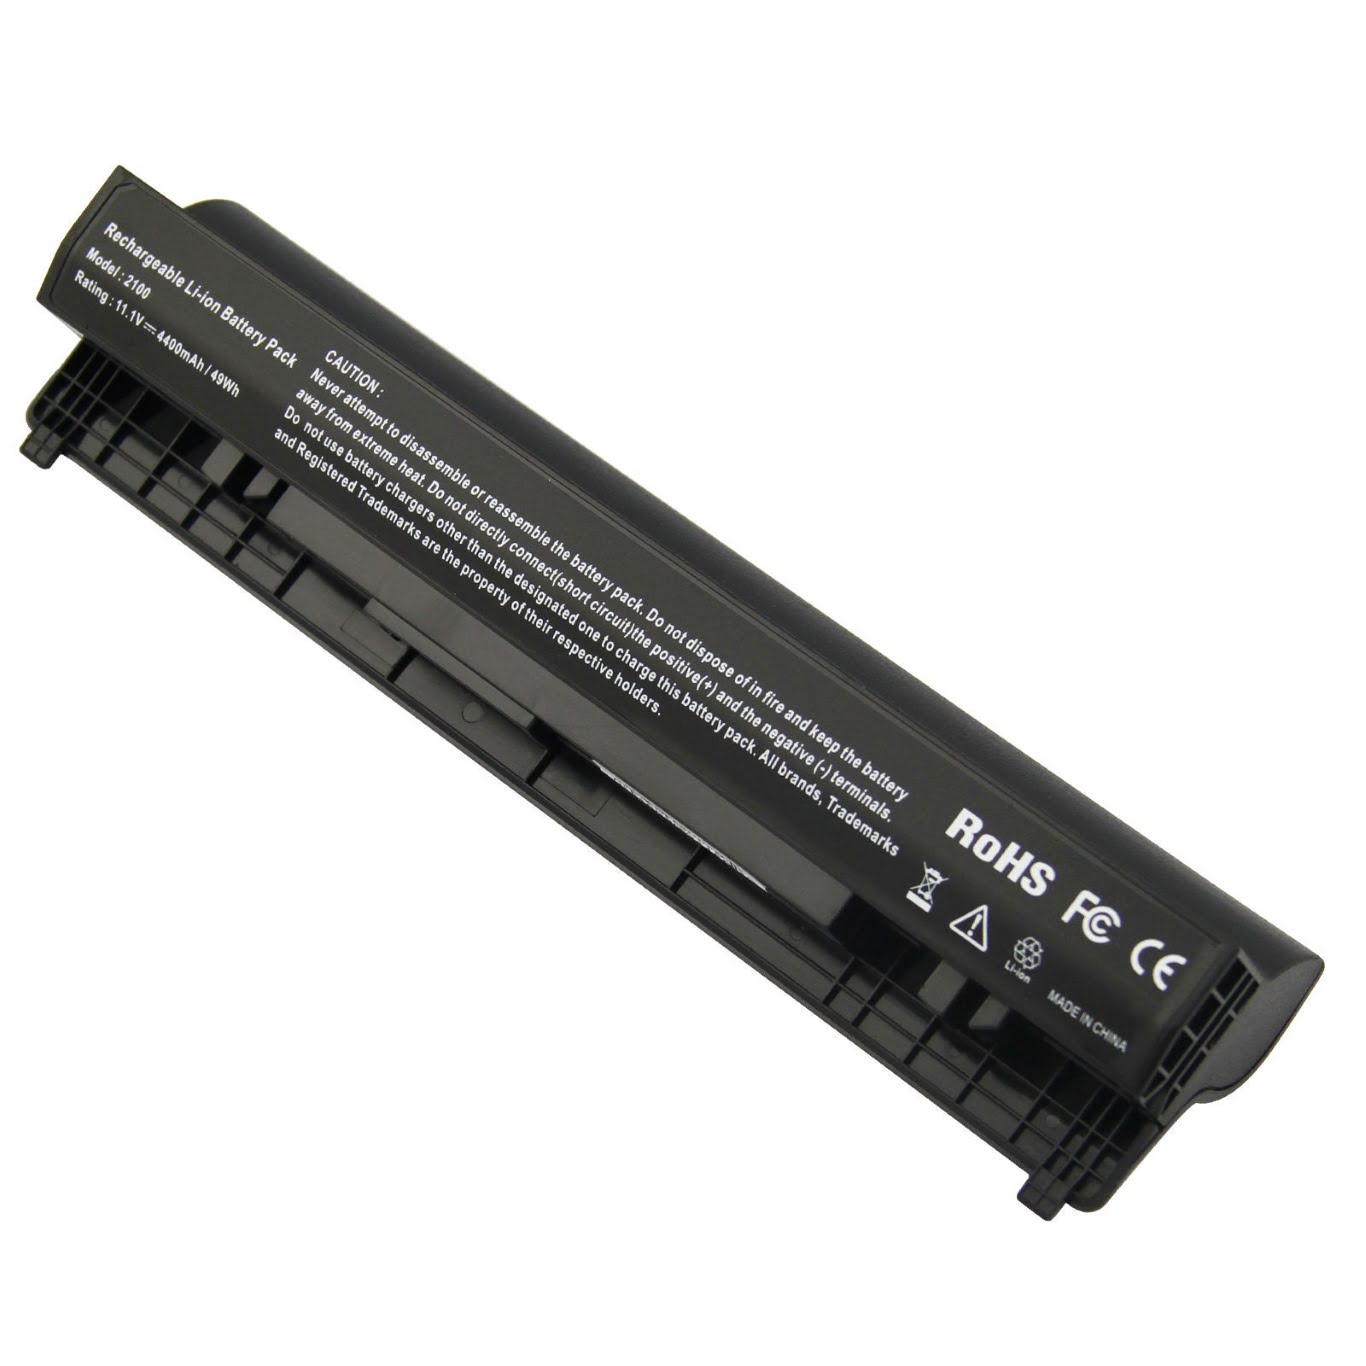 Dell 00r271, 312-0229 Laptop Batteries For Latitude 2100, Latitude 2110 replacement